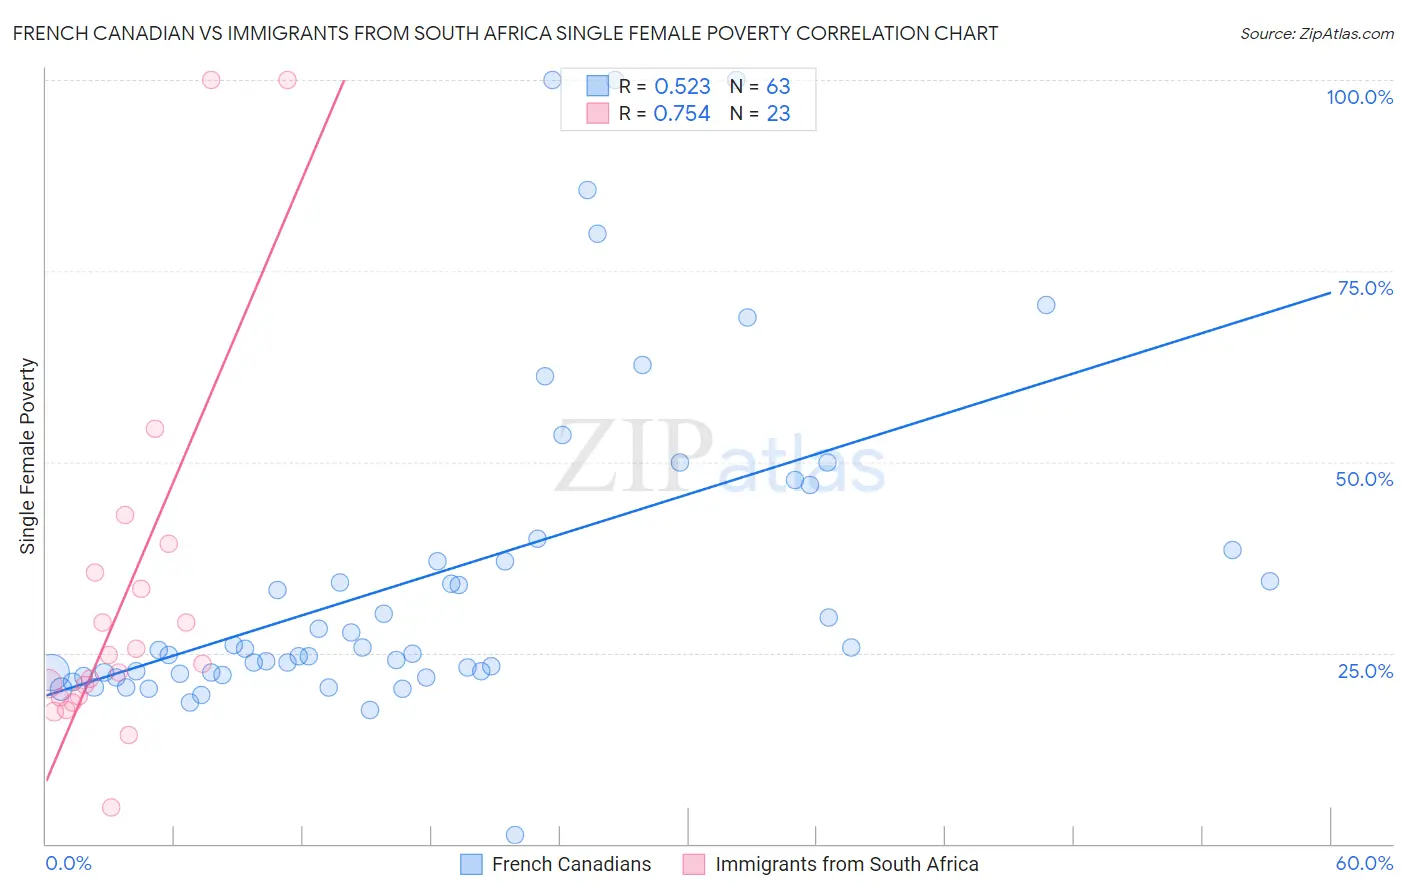 French Canadian vs Immigrants from South Africa Single Female Poverty